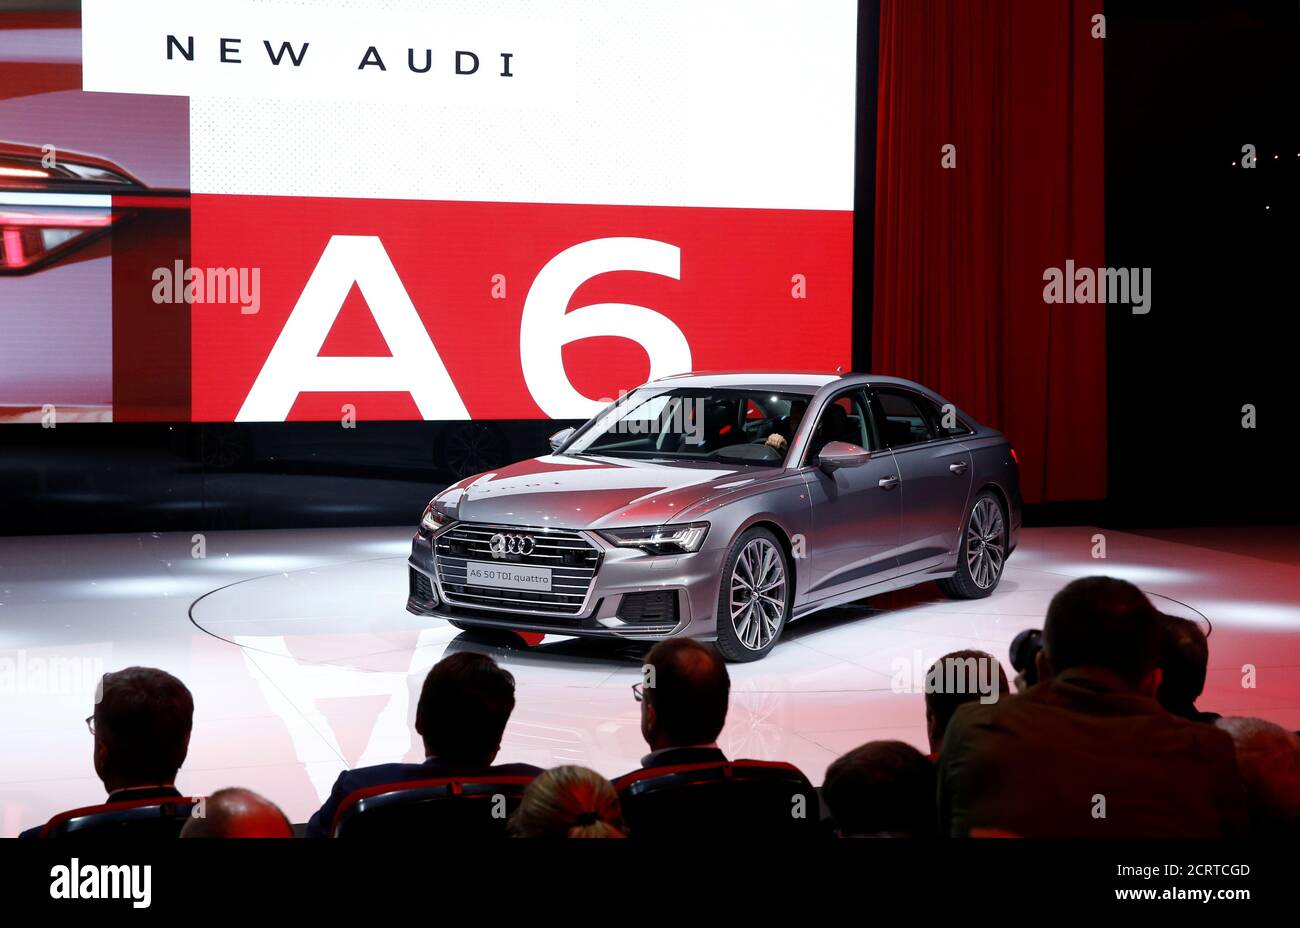 The new Audi A6 is seen during a presentation at the 88th International  Motor Show at Palexpo in Geneva, Switzerland, March 6, 2018. REUTERS/Denis  Balibouse Stock Photo - Alamy